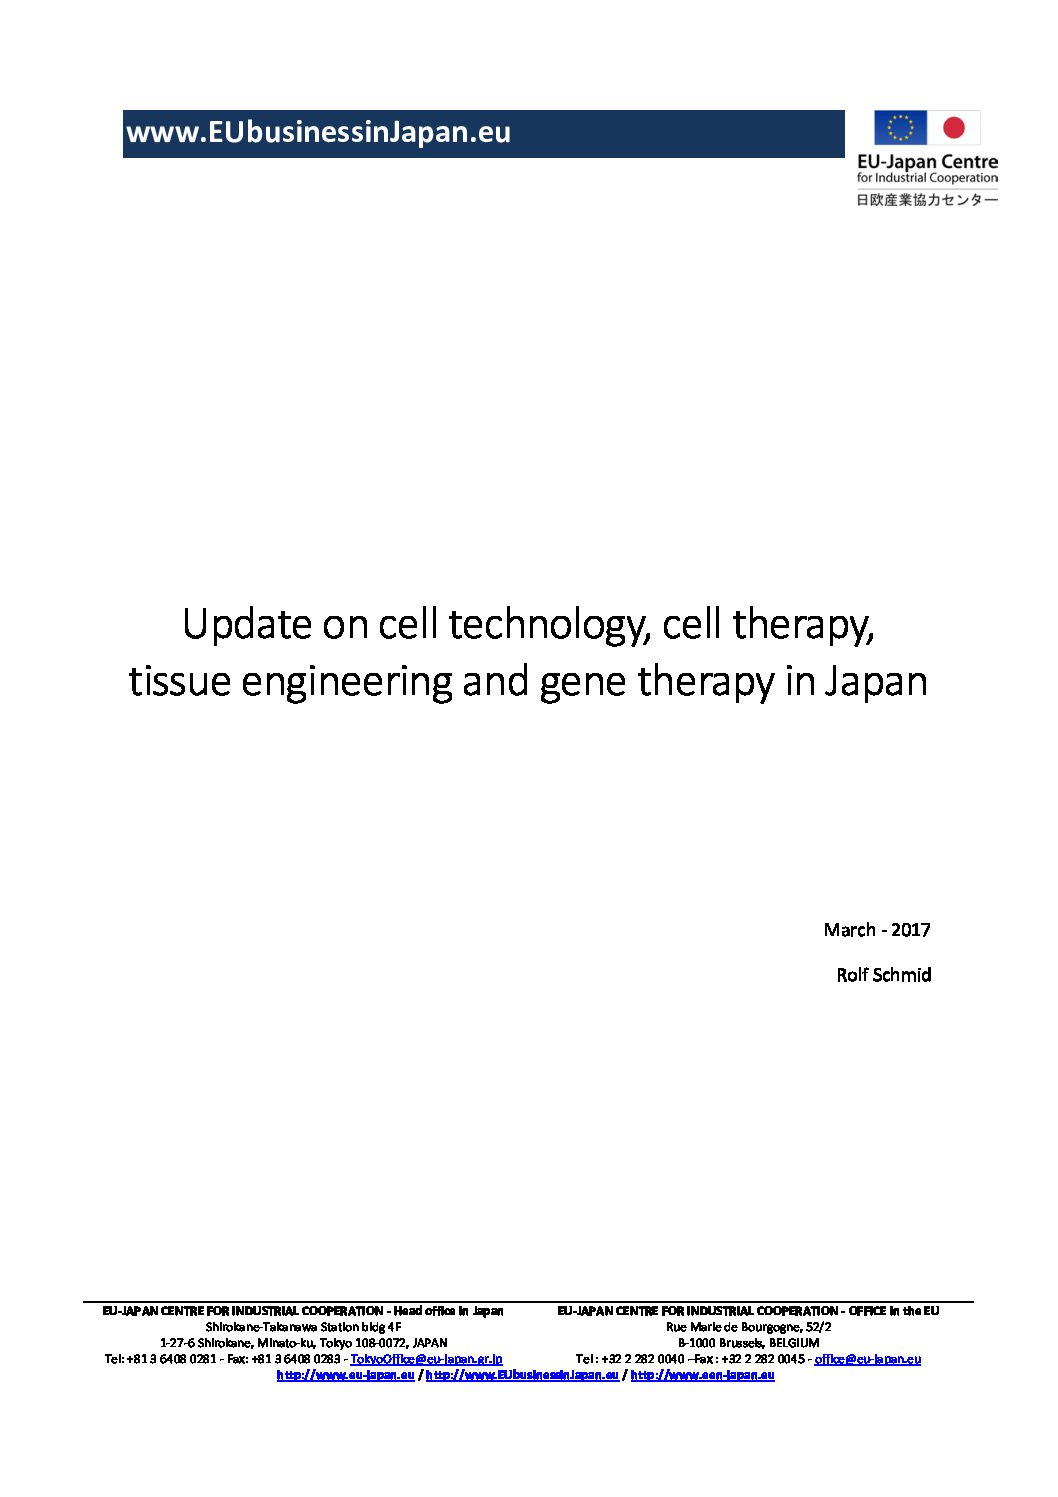 Update on cell technology, cell therapy, tissue engineering and gene therapy in Japan